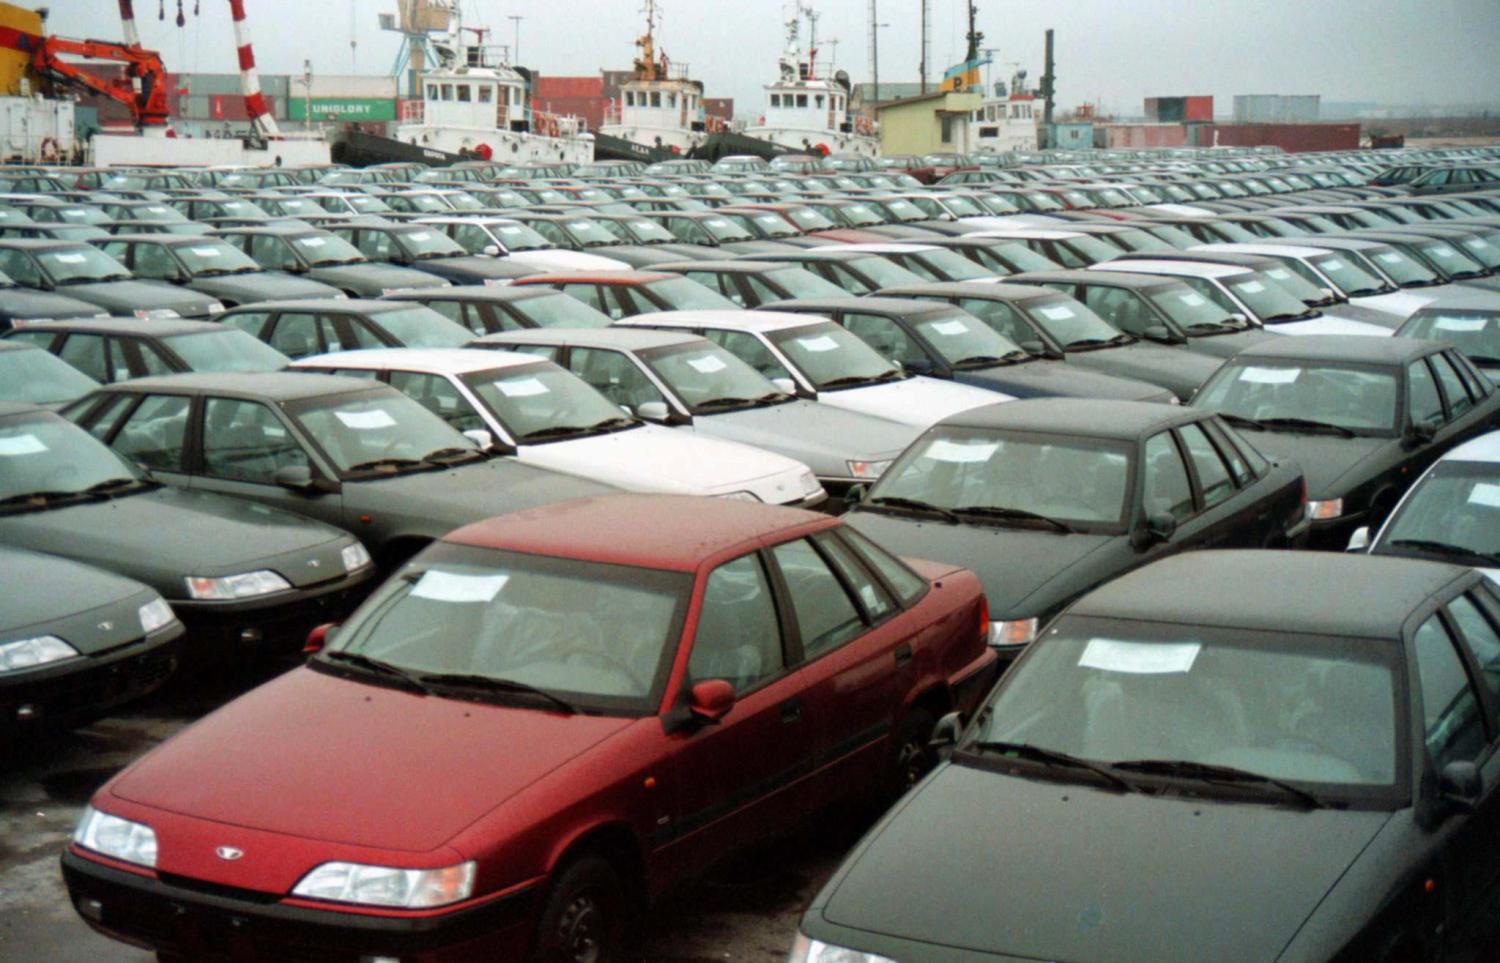 More than 1,000 South Korea-made Daewoo cars are unloaded at the Bulgarian Black Sea port of Varna on March 31. The cars will be disassembled and shipped in containers to neighbouring countries.BULGARIA DAEWOO